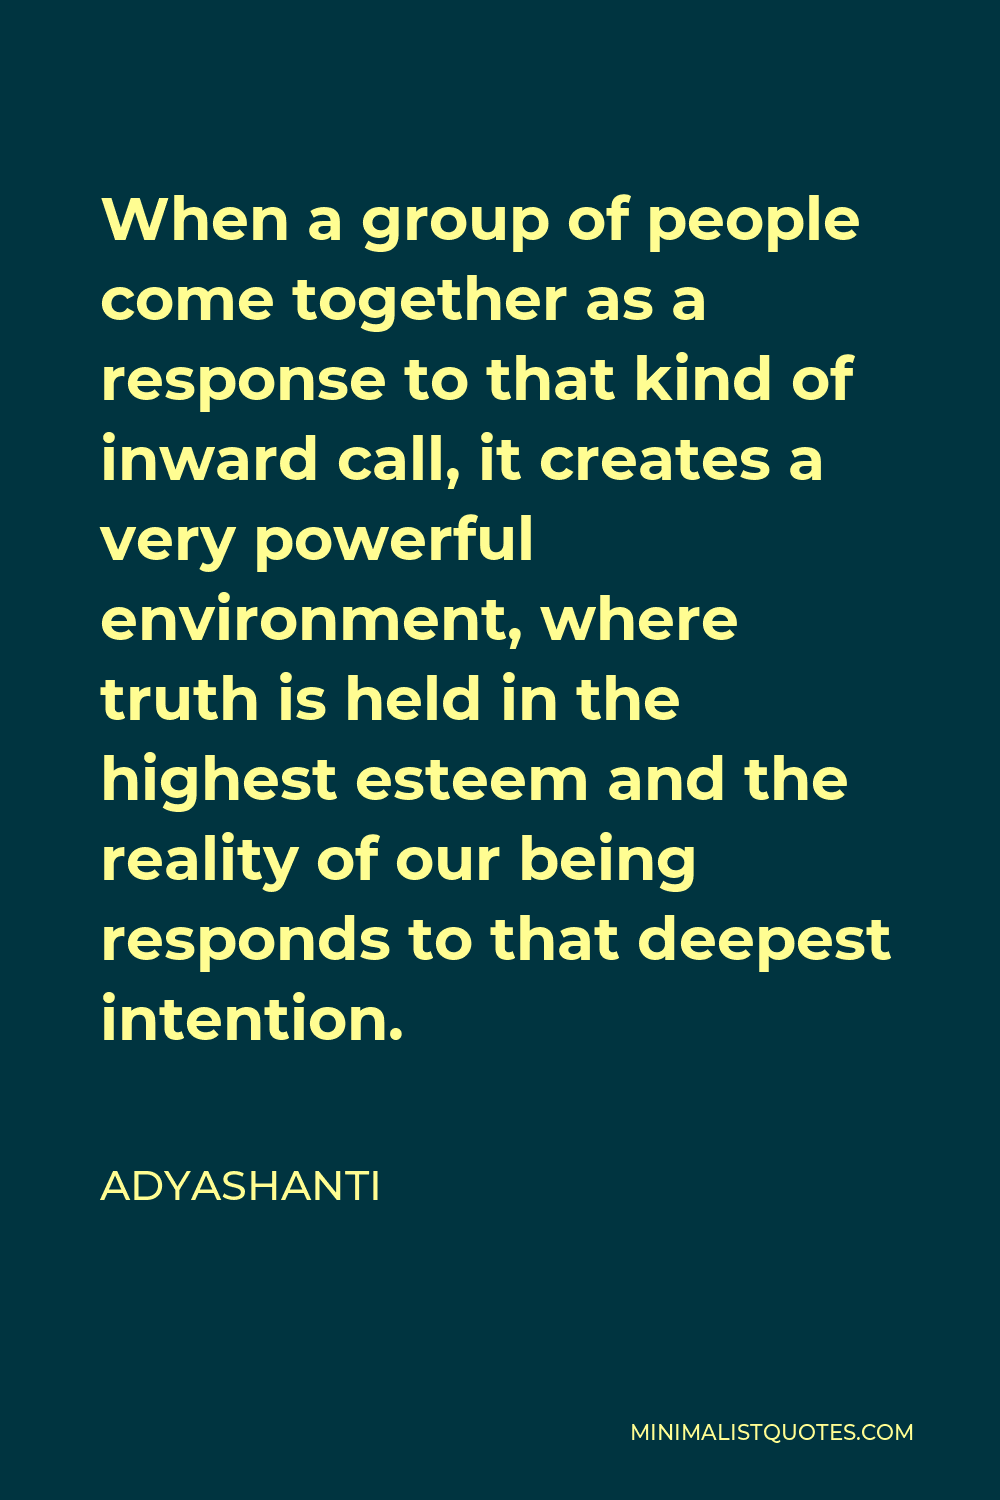 Adyashanti Quote - When a group of people come together as a response to that kind of inward call, it creates a very powerful environment, where truth is held in the highest esteem and the reality of our being responds to that deepest intention.